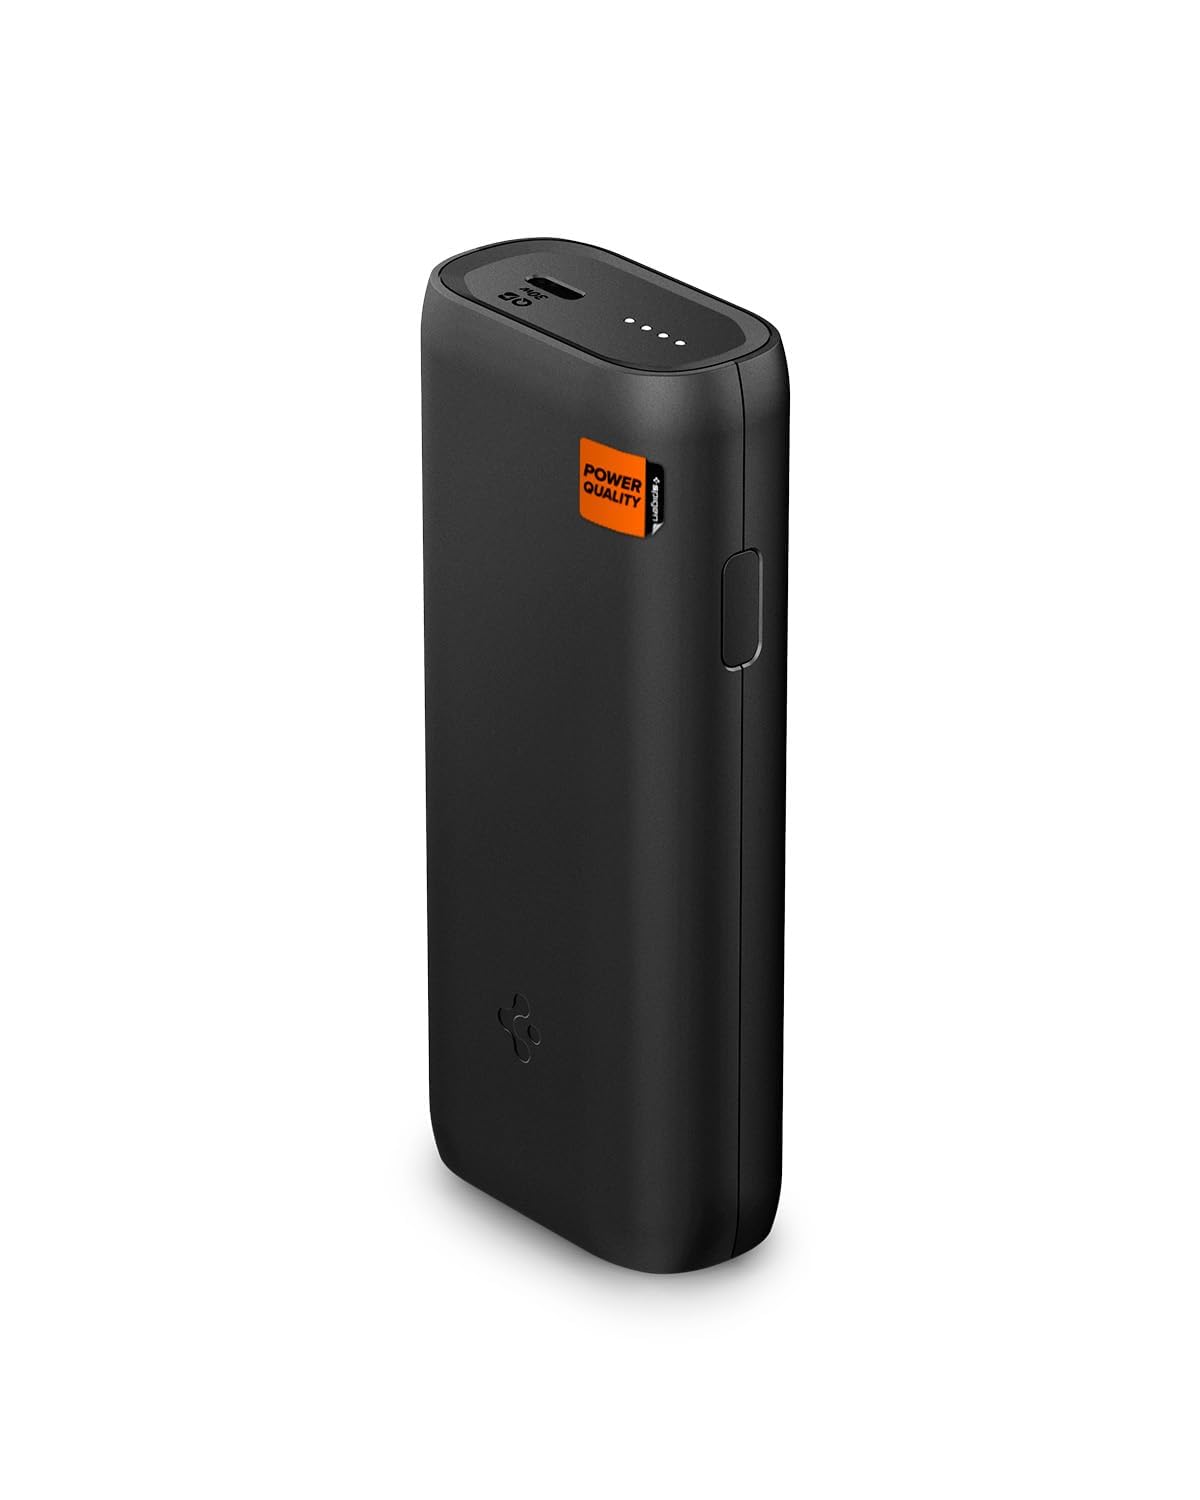 Spigen ArcPack 30W 10000mAh Super-Compact USB C Power Bank  PD PPS USB Type C Portable Charger Battery Pack [Cable Included] $26.99